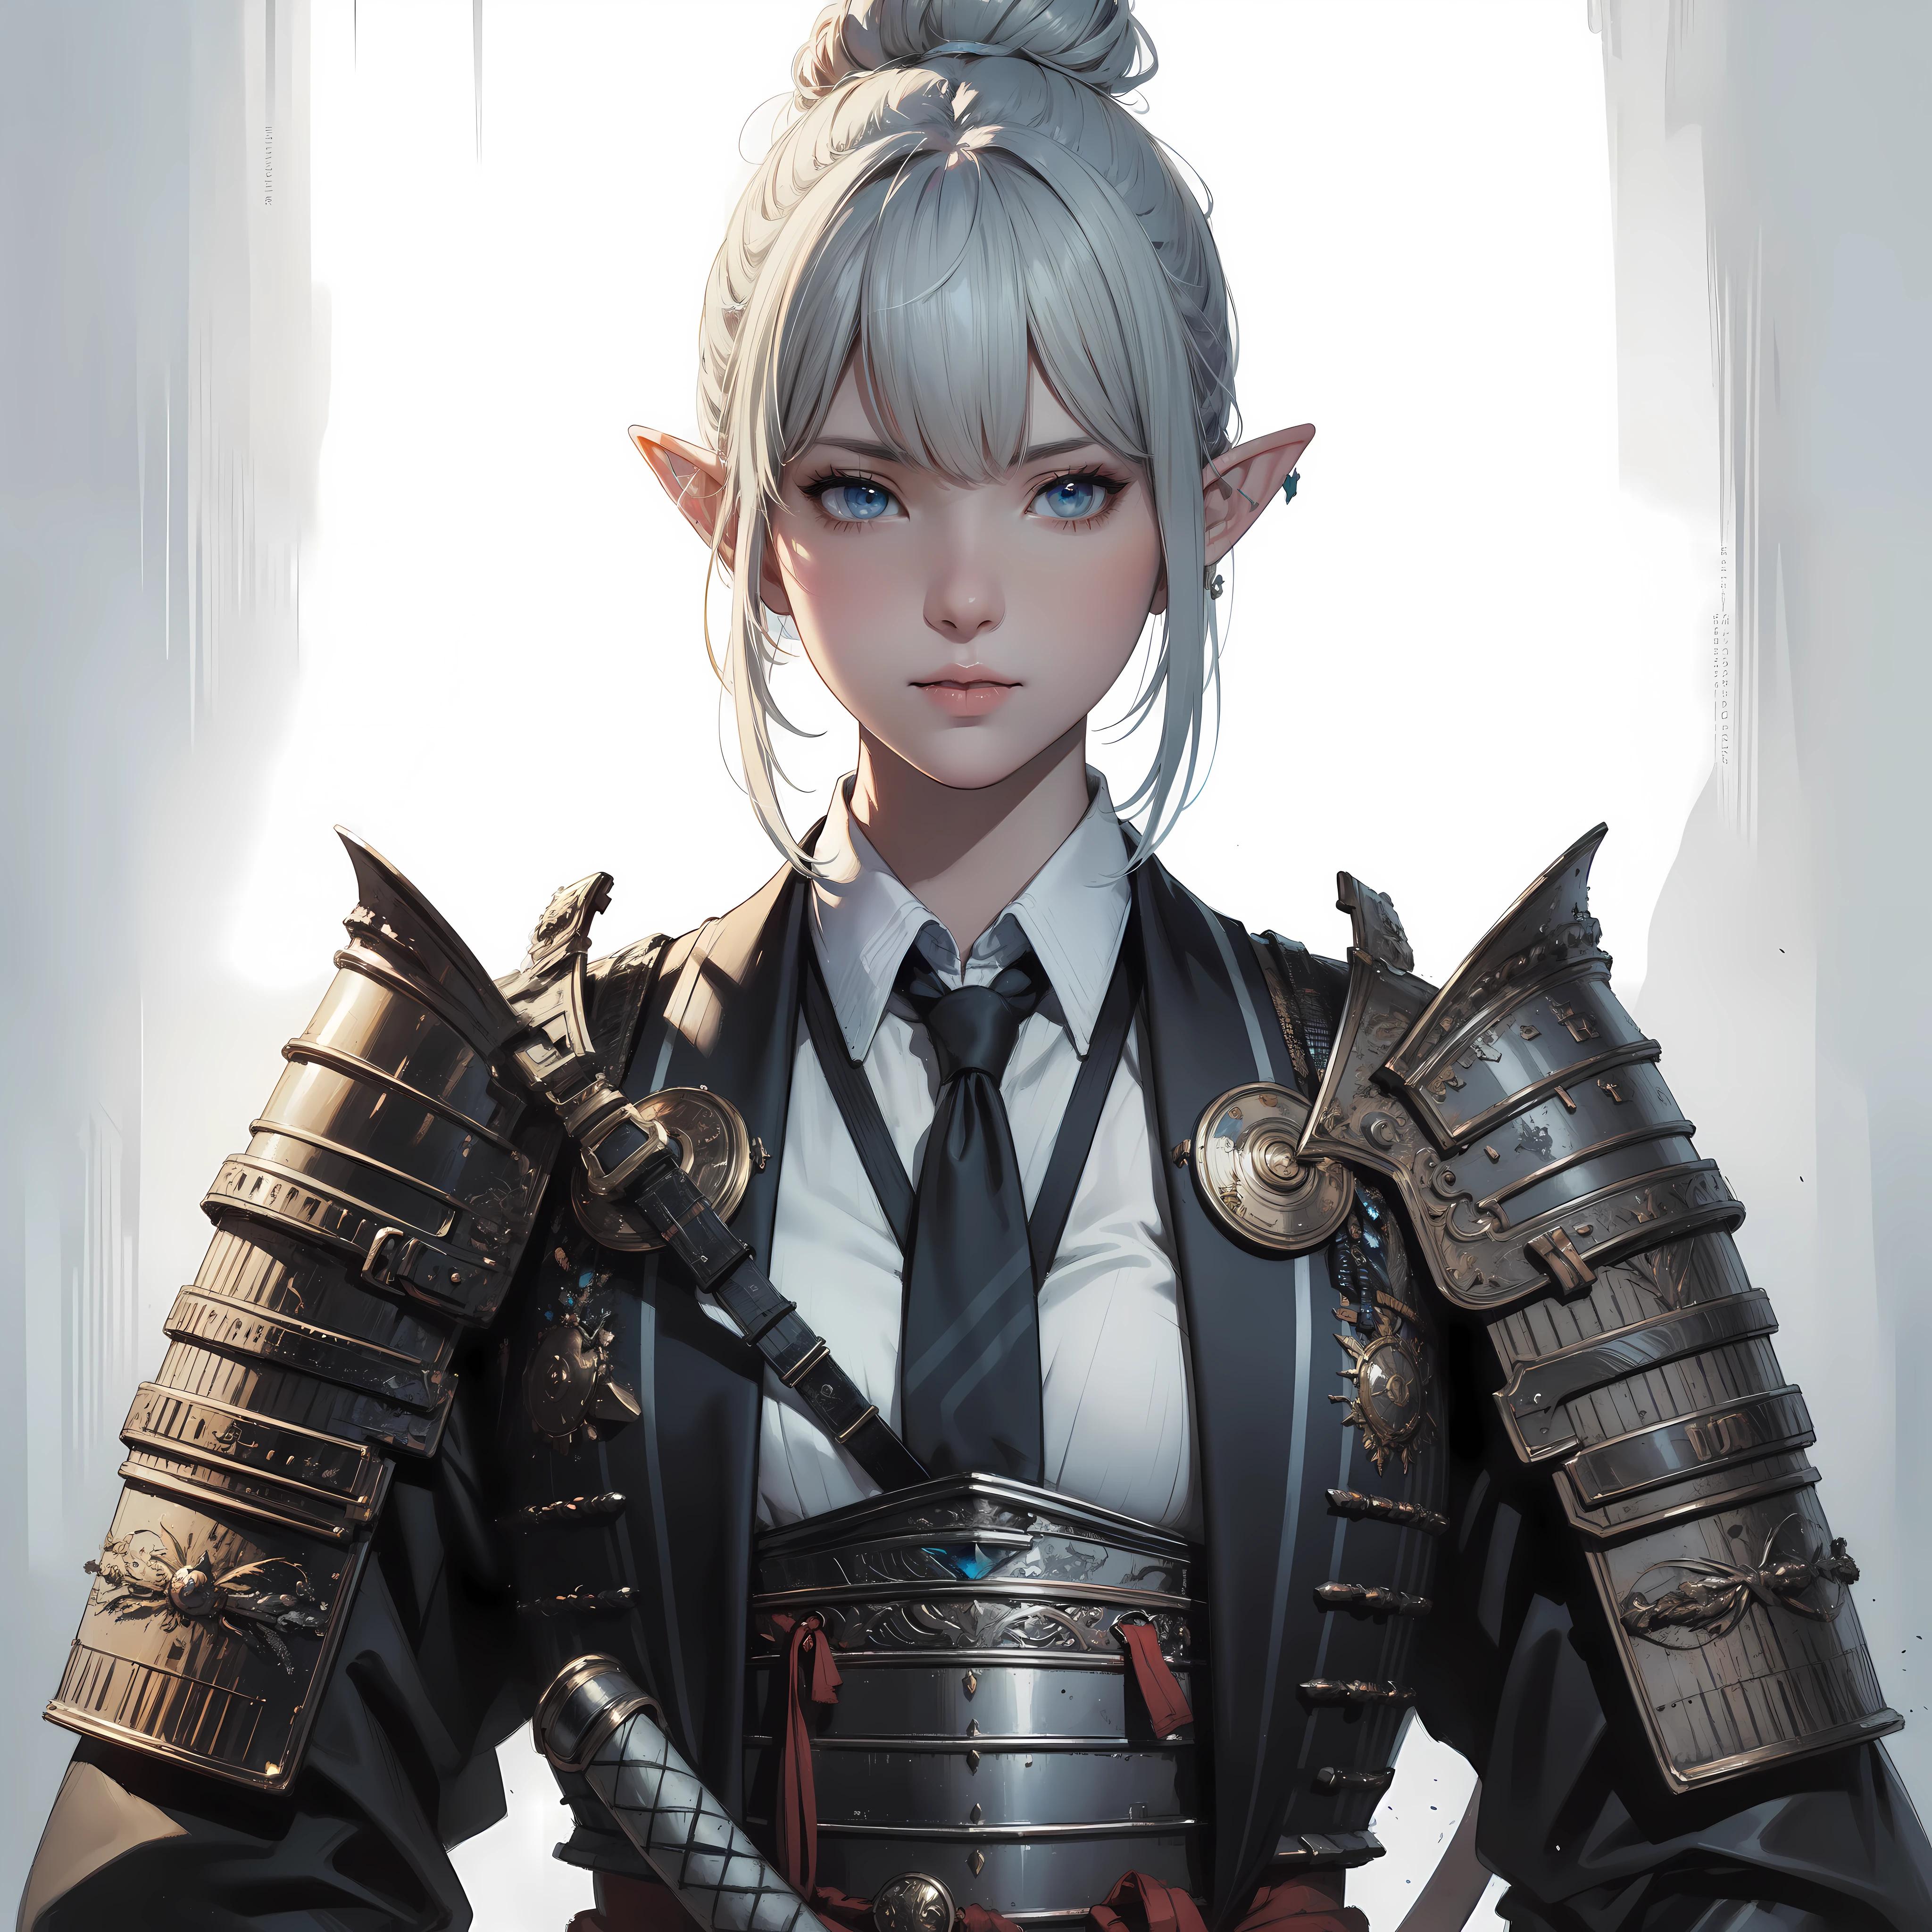 masterpiece, best quality, incredibly detailed, illustration, fantasy, portrait of Shogun elf female, solo, half body, bangs, pixie silver hair, hair bun, blue eyes, white shirt, suit with samurai armor, serious, mature, georgeous, seated office desk, from below, dynamics pose, concepts art by artgerm, ayami kojima, detailed by greg rutkowski, painting by wadim kashin, carne griffiths, arthur rackham.